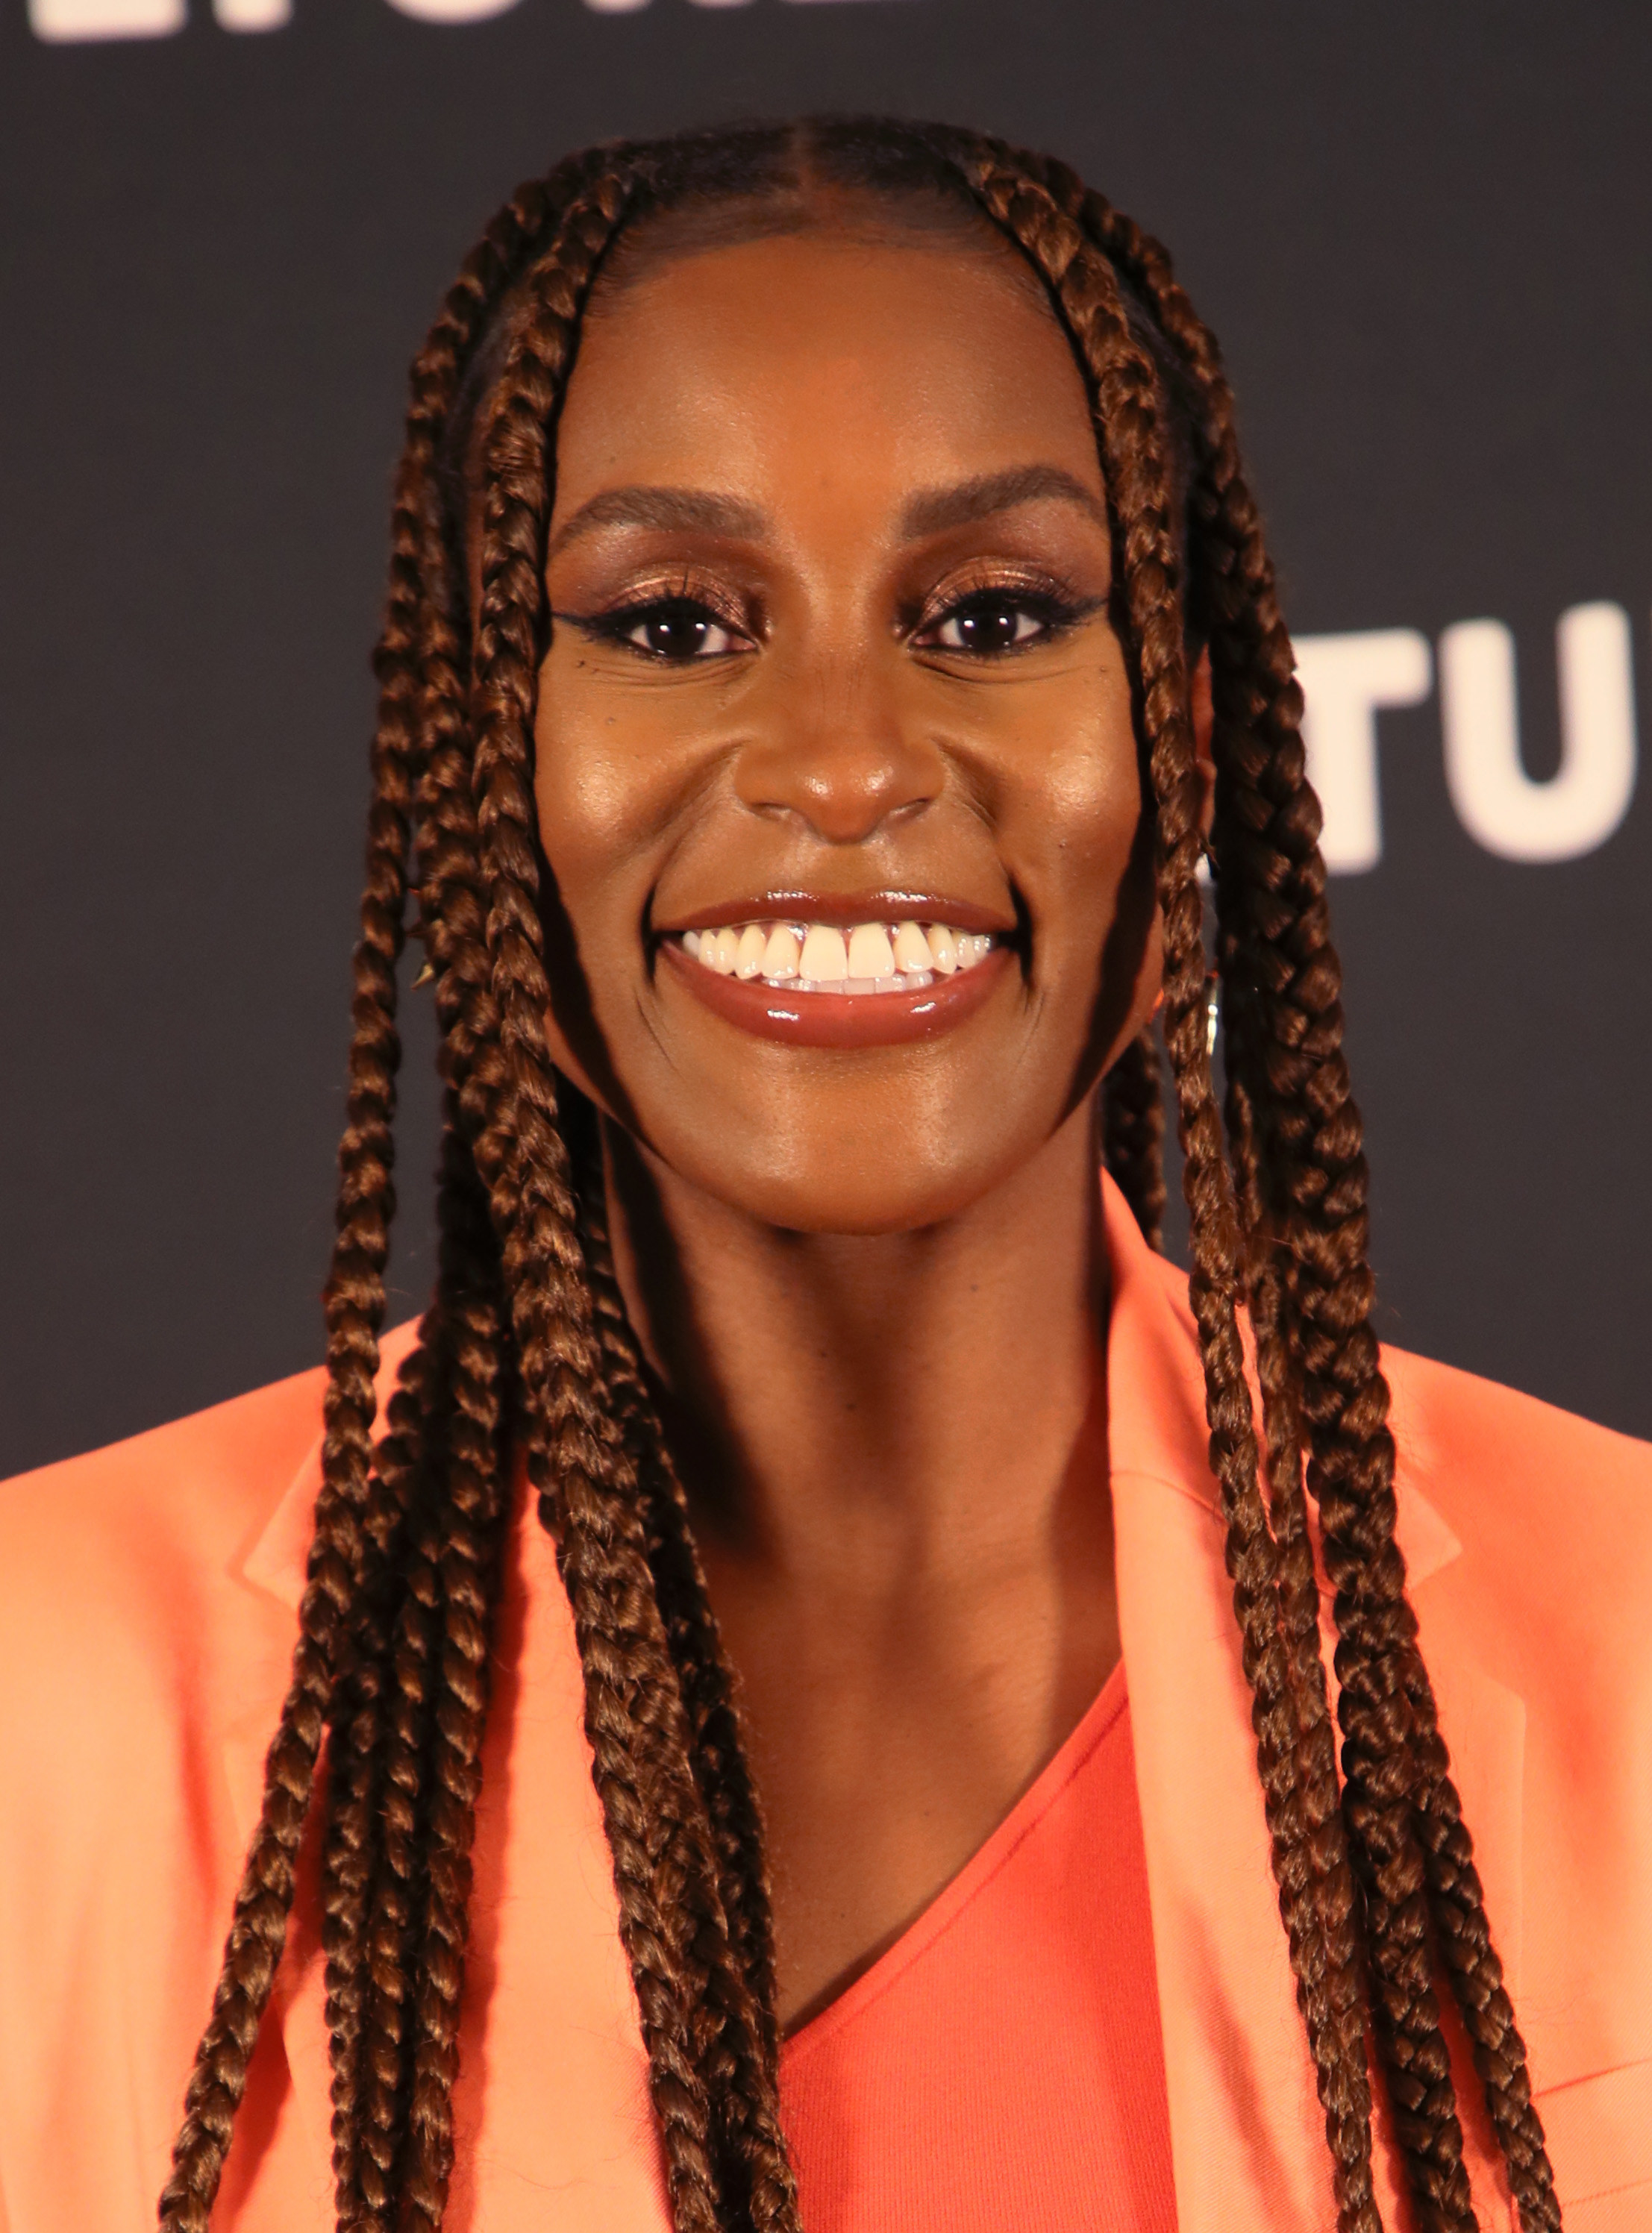 Issa Rae at the 2021 Vulture Festival at The Hollywood Roosevelt on November 13, 2021